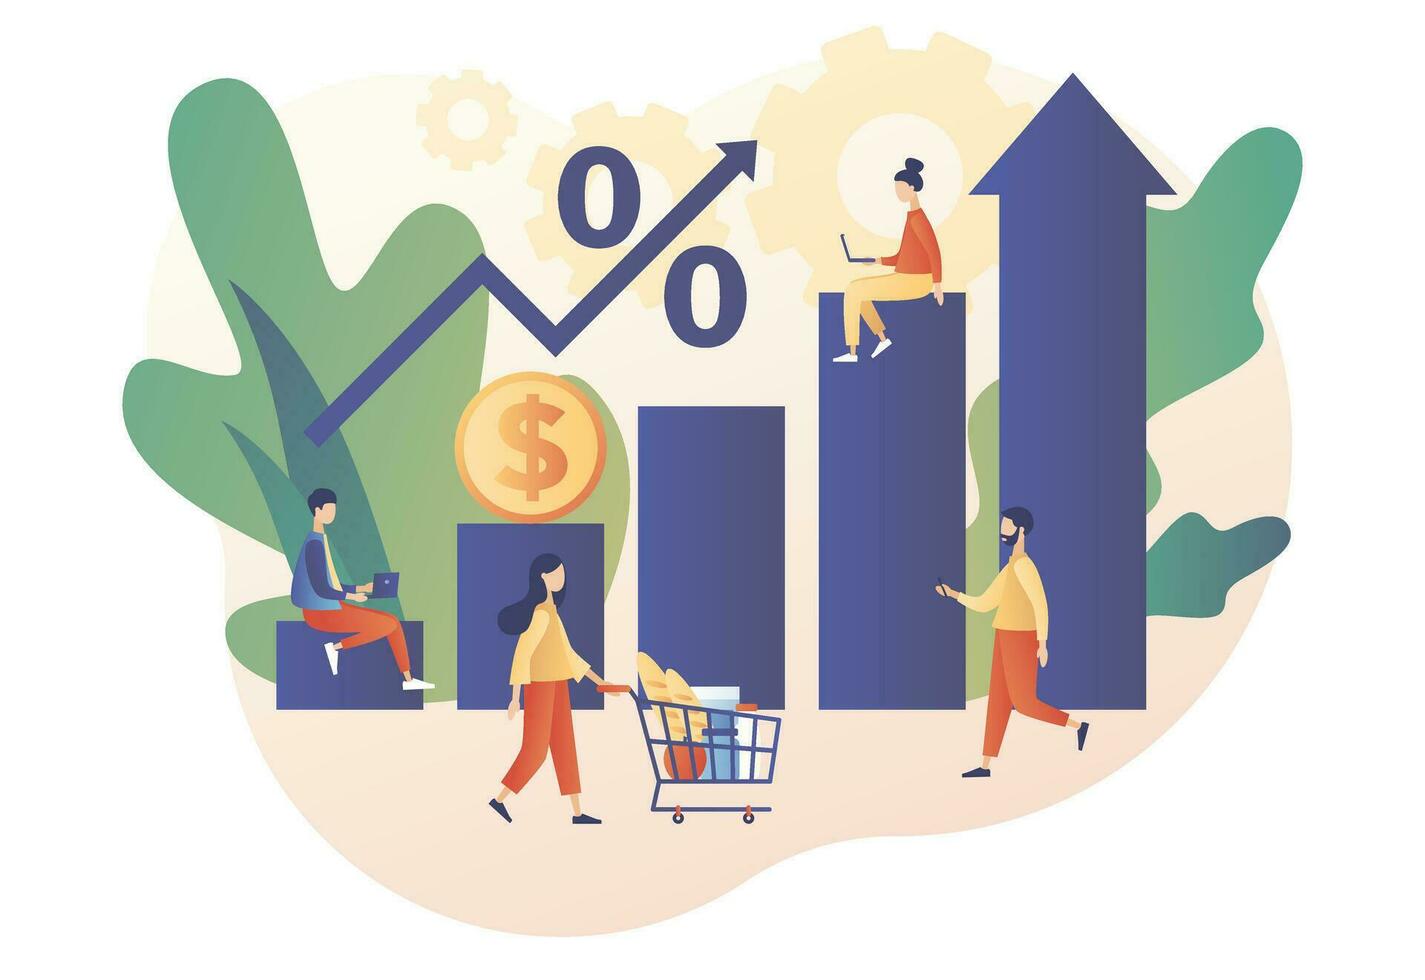 Inflation in economy. Rising food prices. Crisis concept. Unstable prediction financial problems. Modern flat cartoon style. Vector illustration on white background